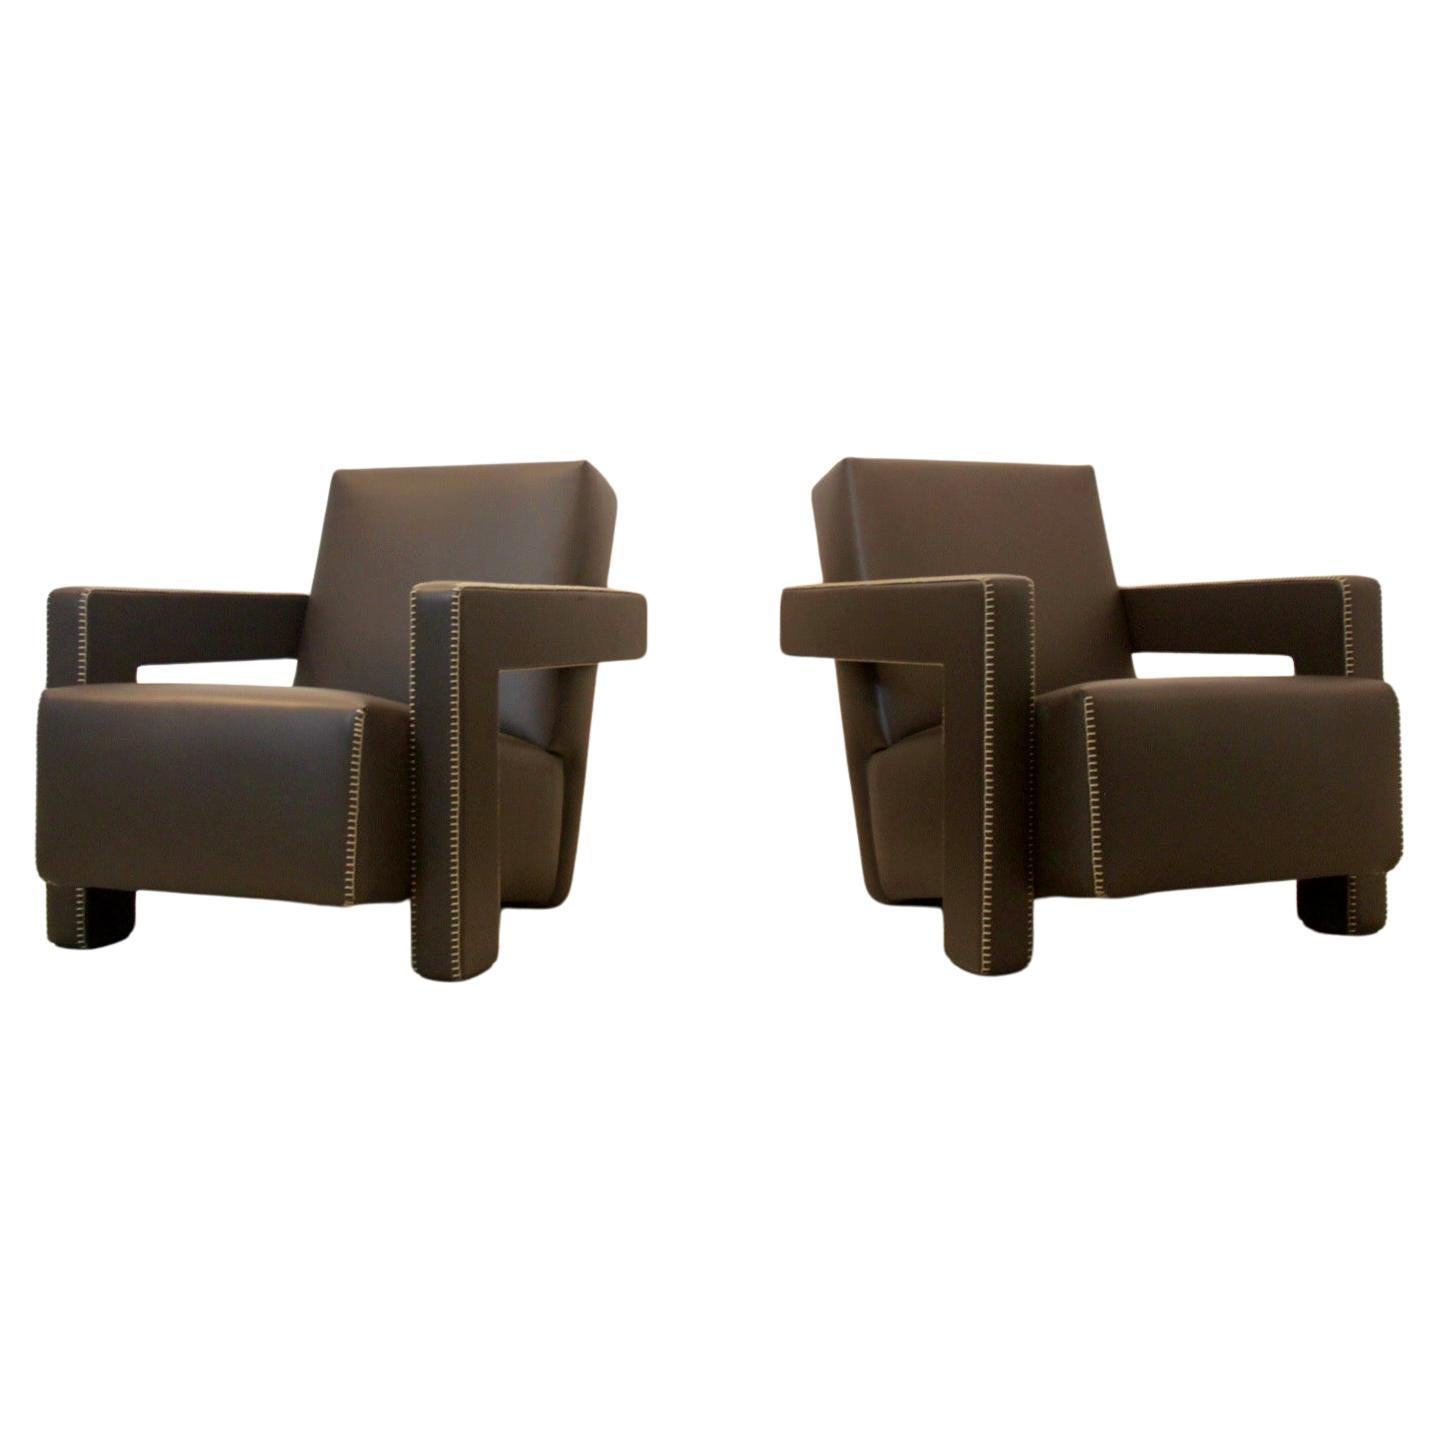 Chocolate Brown Leather ‘Utrecht’ Lounge Chairs by Gerrit Rietveld for Cassina